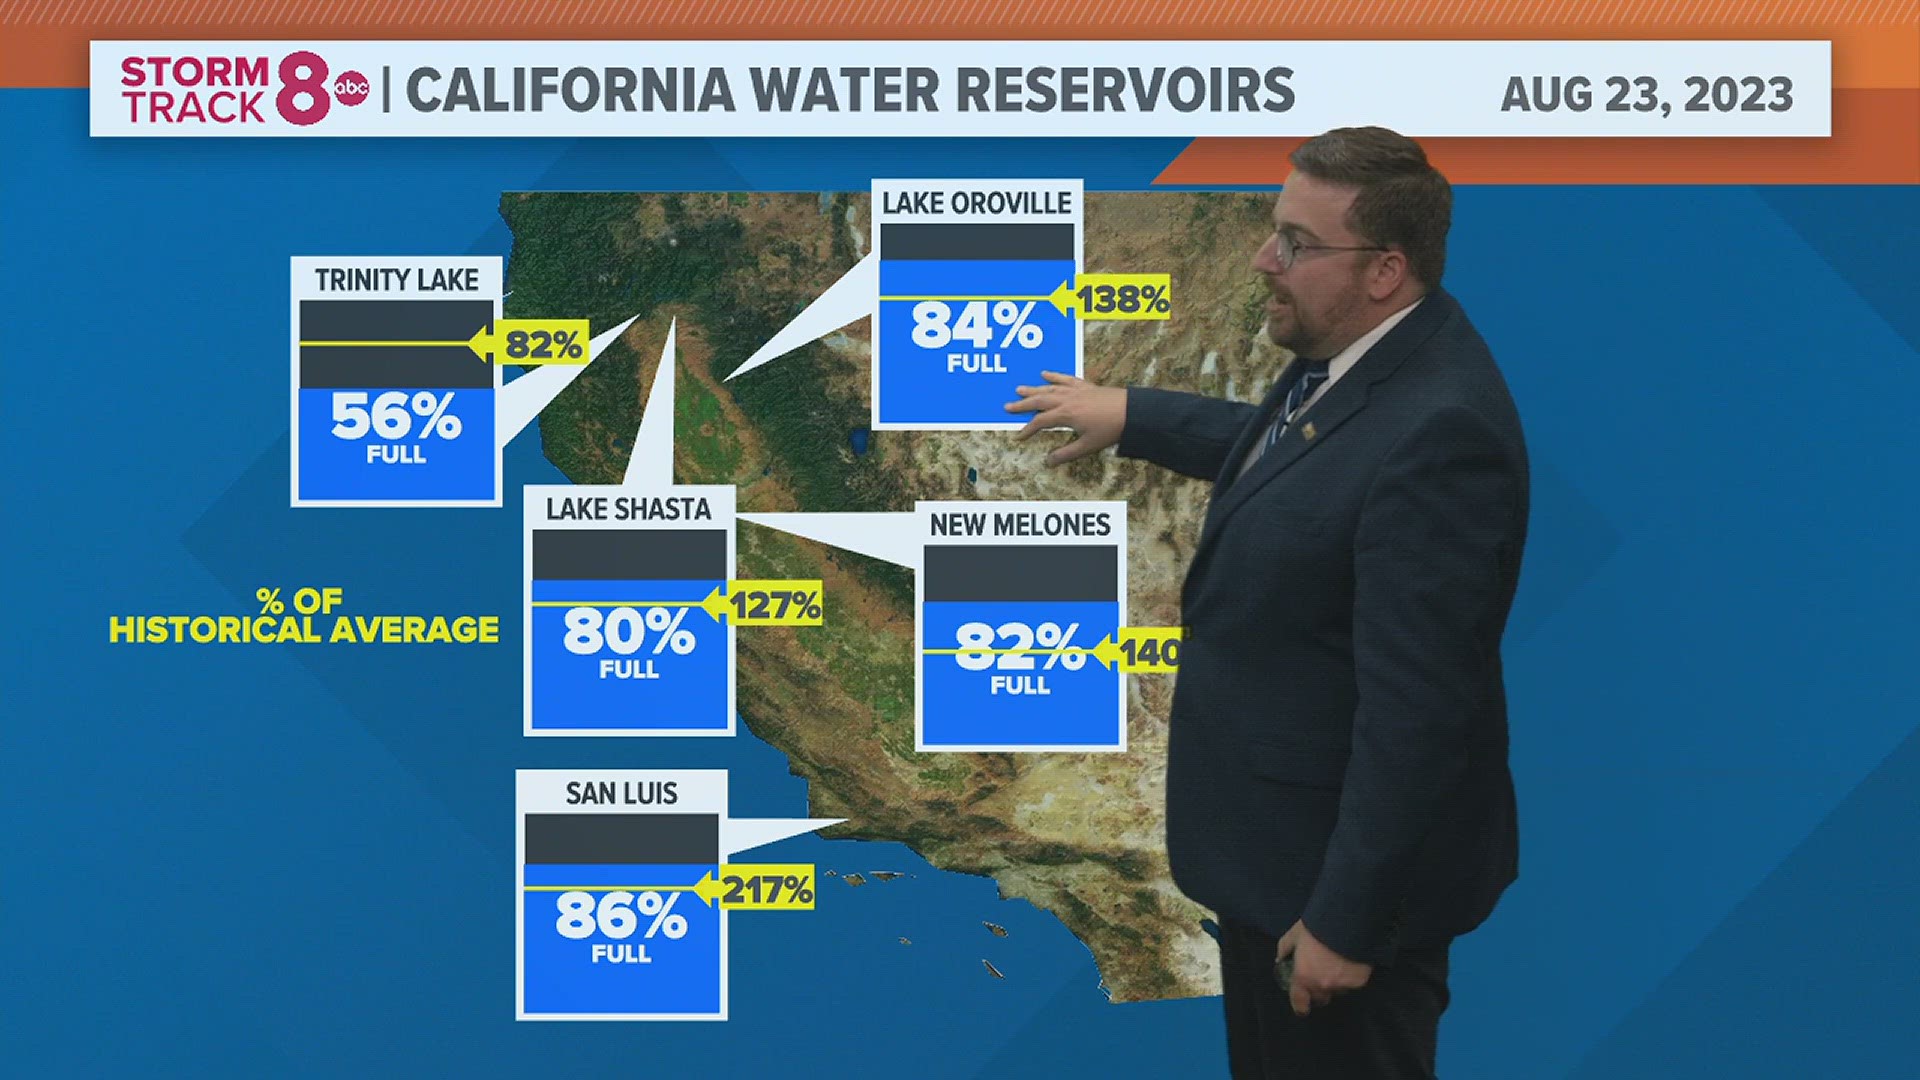 A blockbuster winter with record snowpack and rain from Tropical Storm Hilary improves California water reservoir levels.